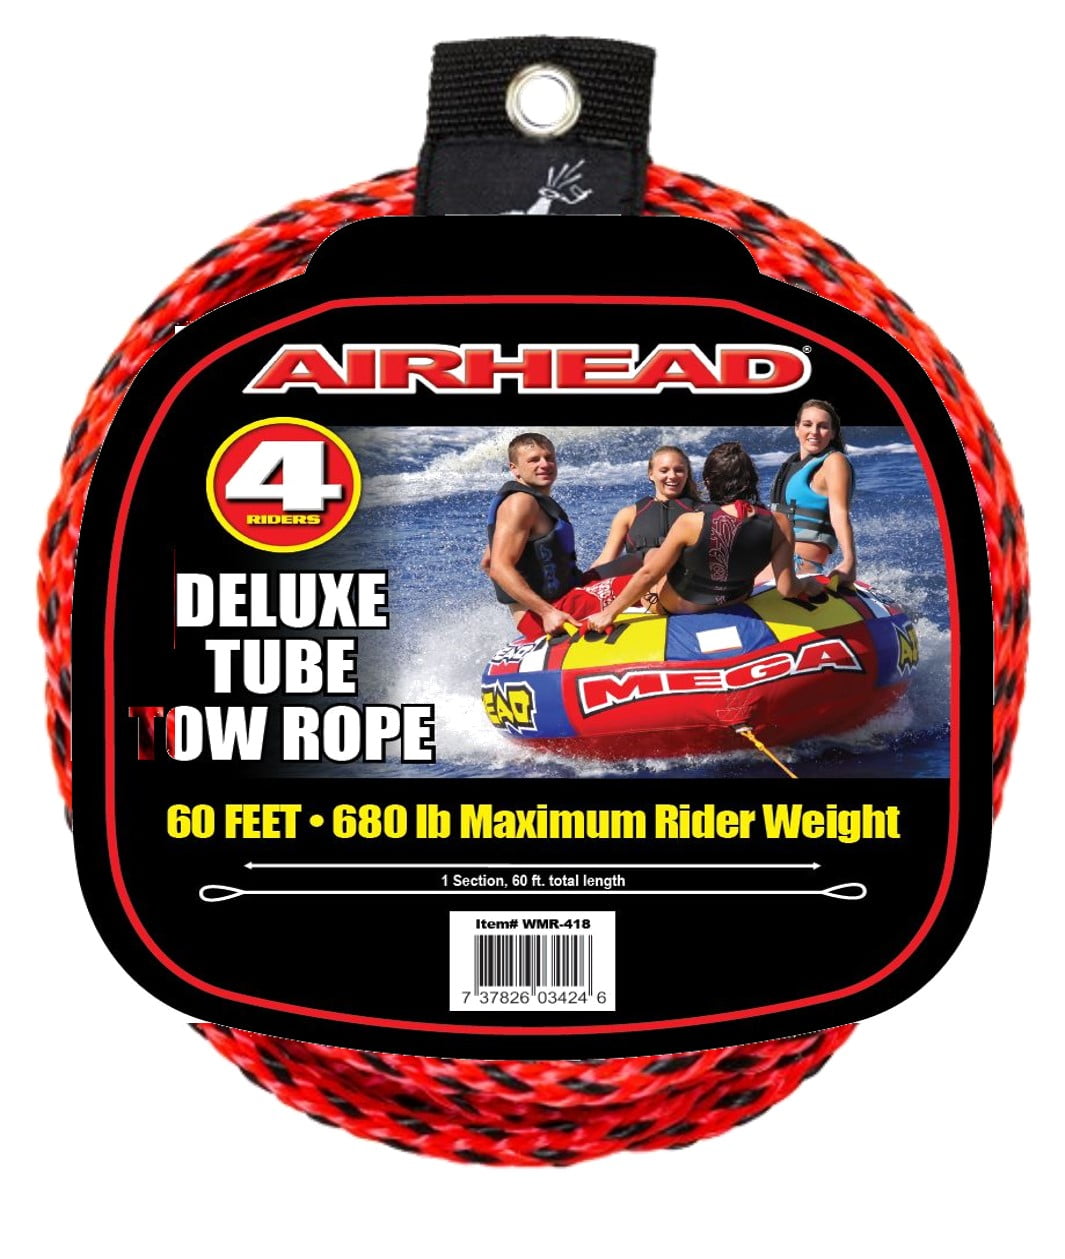 Airhead 4-Rider Towable Tube Rope for Water Sports